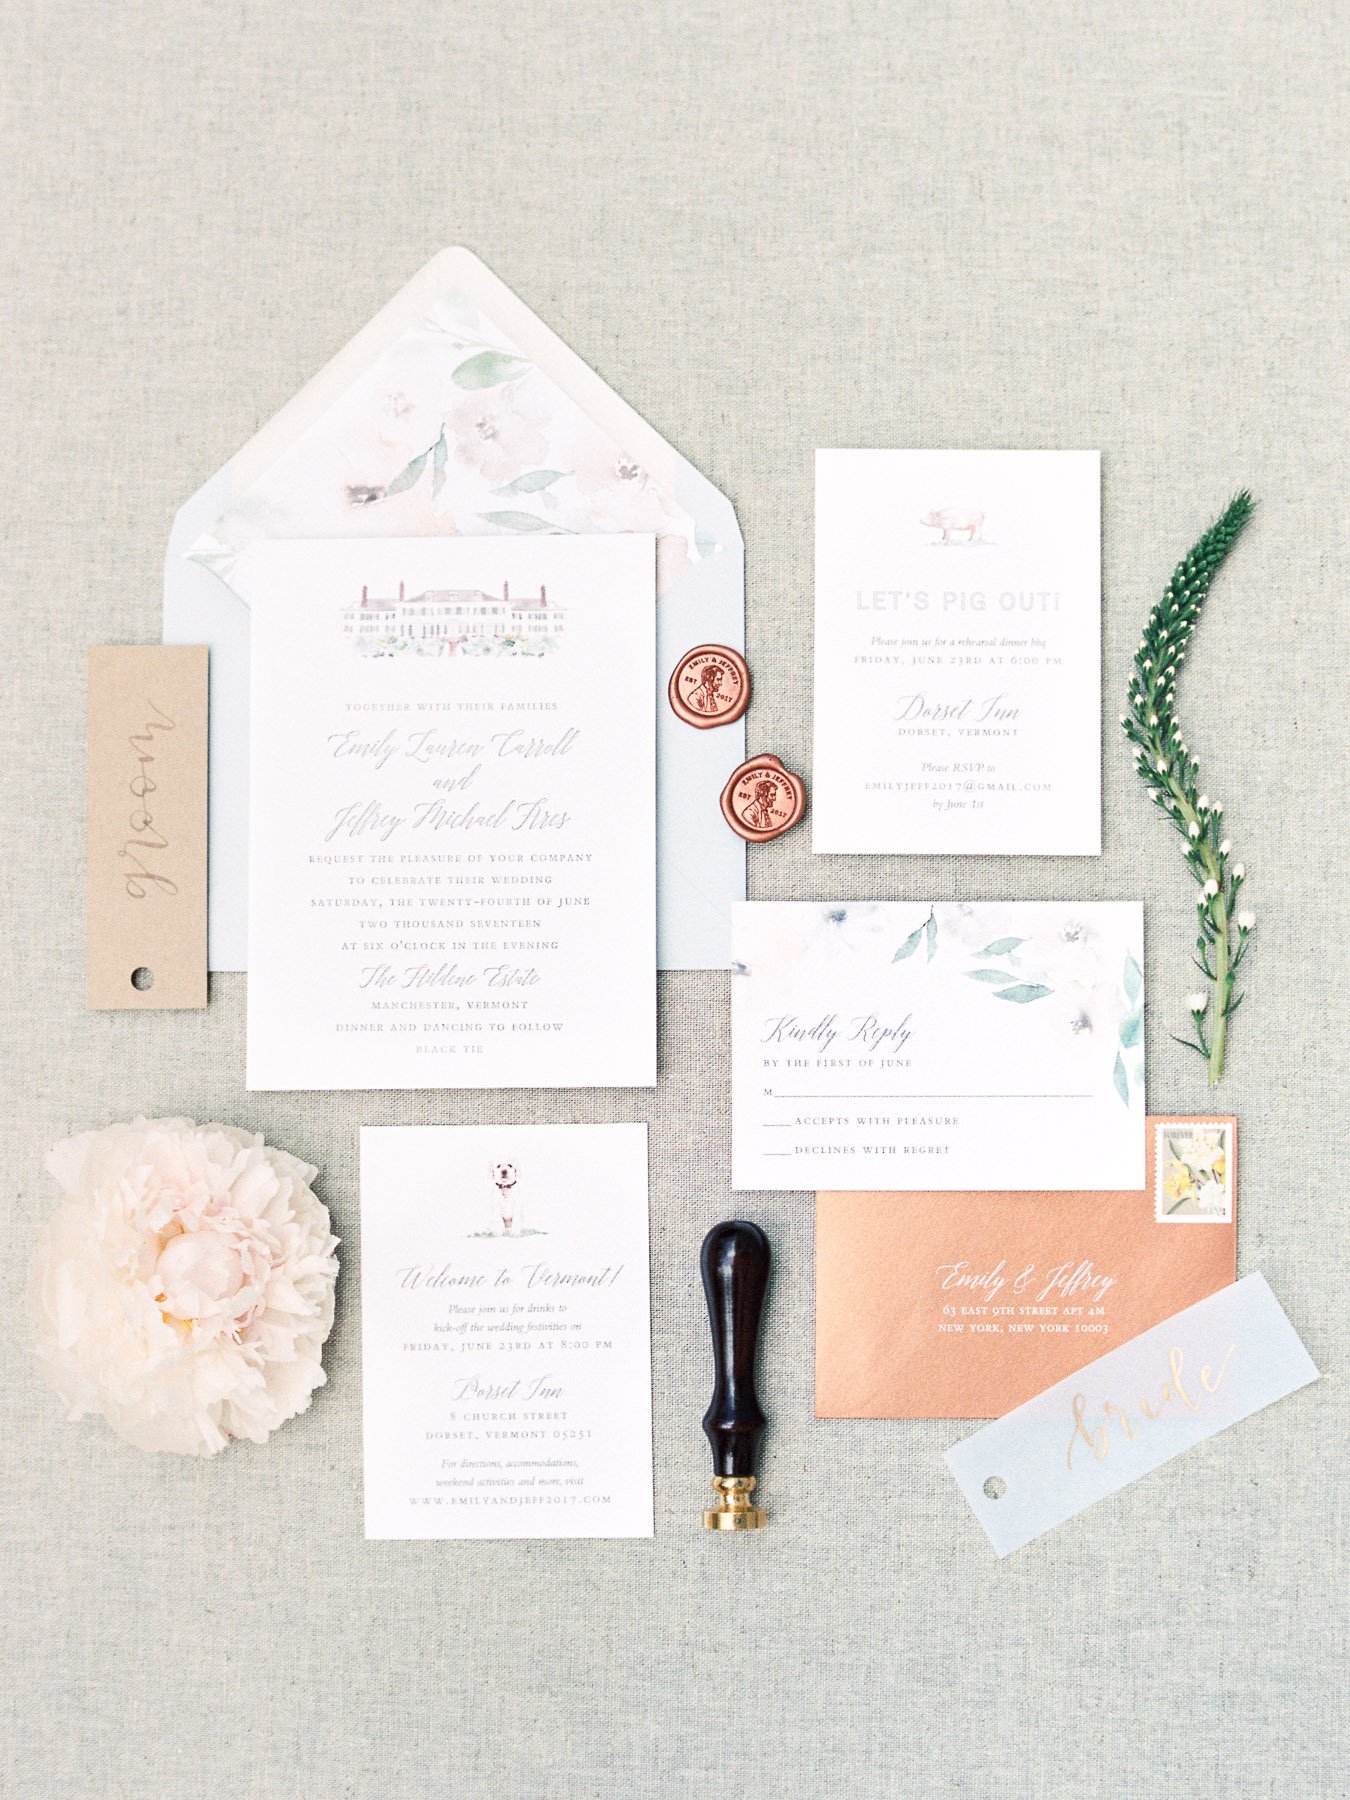 Wedding Invitation Suite by Tie That Binds